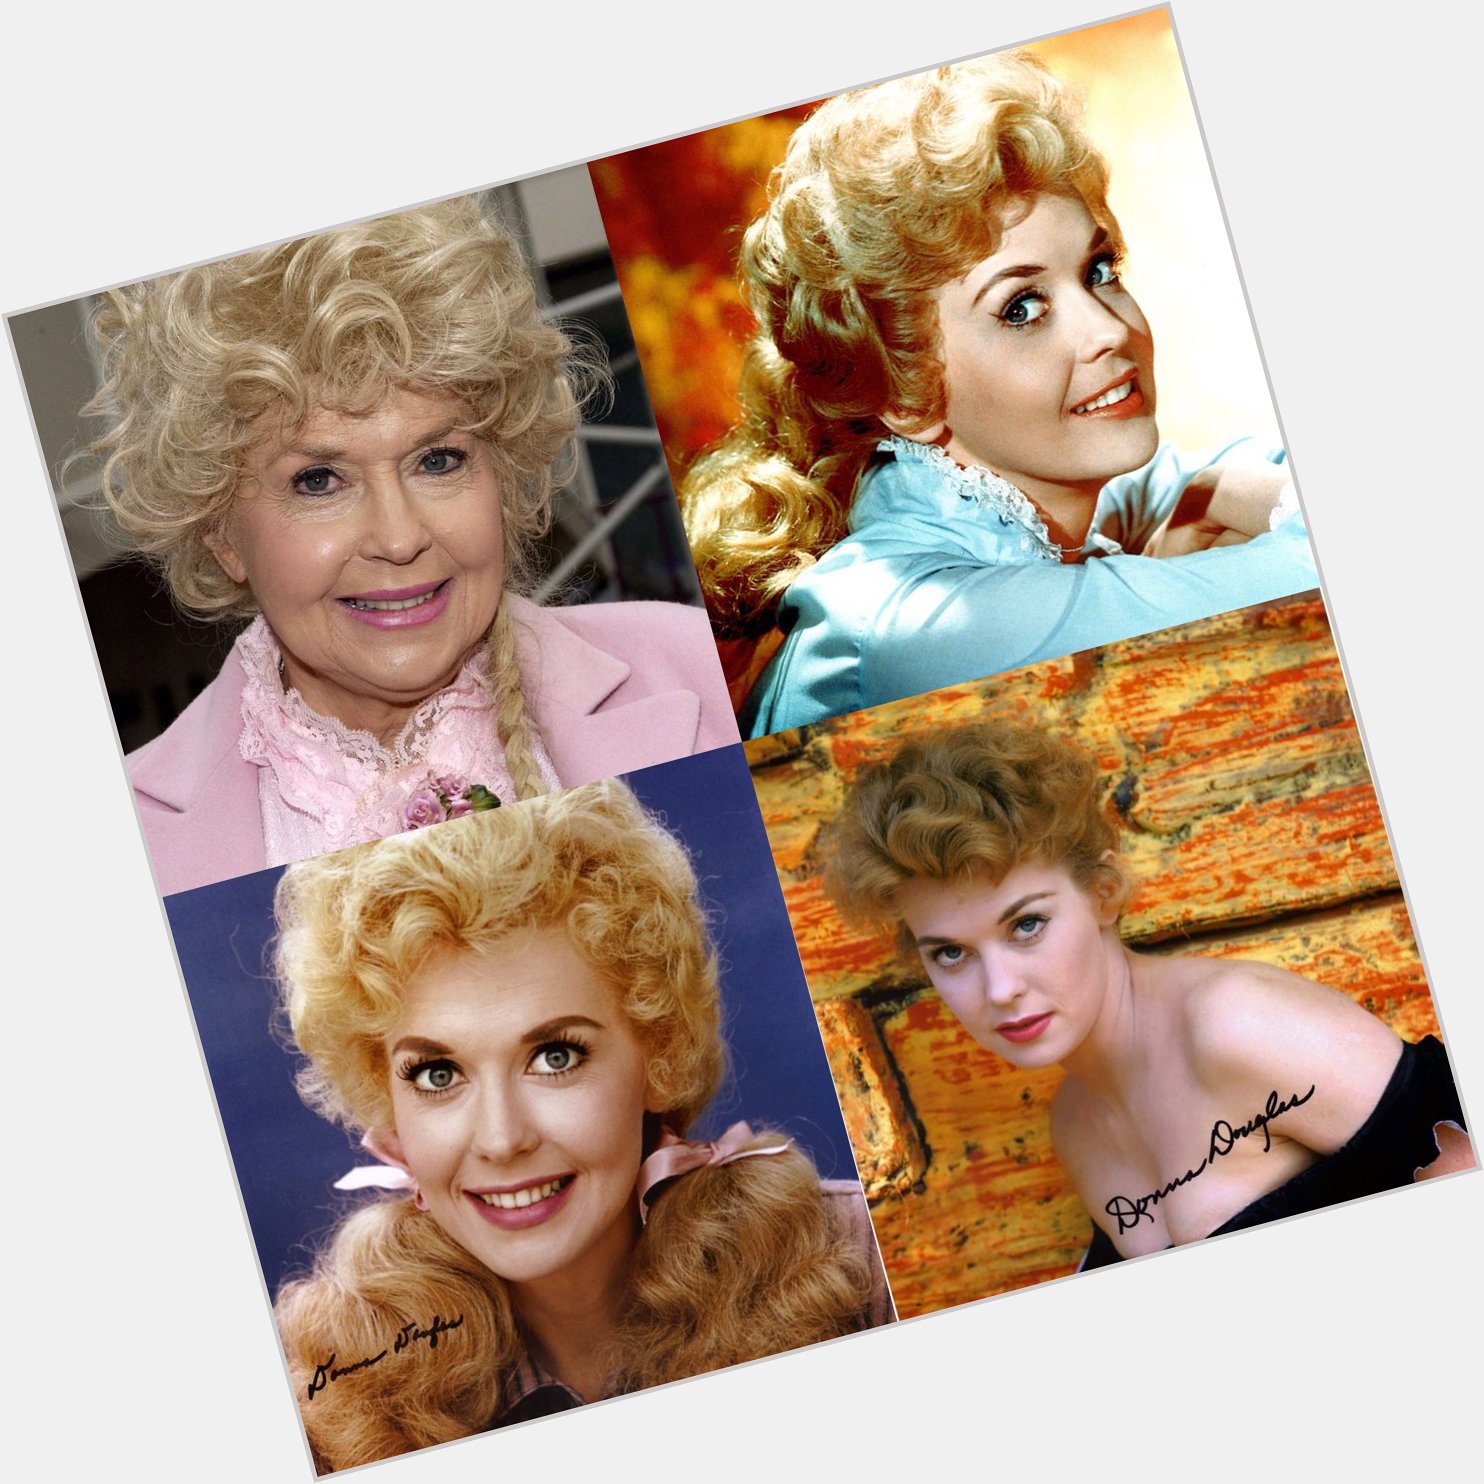 Happy 88 birthday to Donna Douglas up in heaven. May she Rest In Peace.  